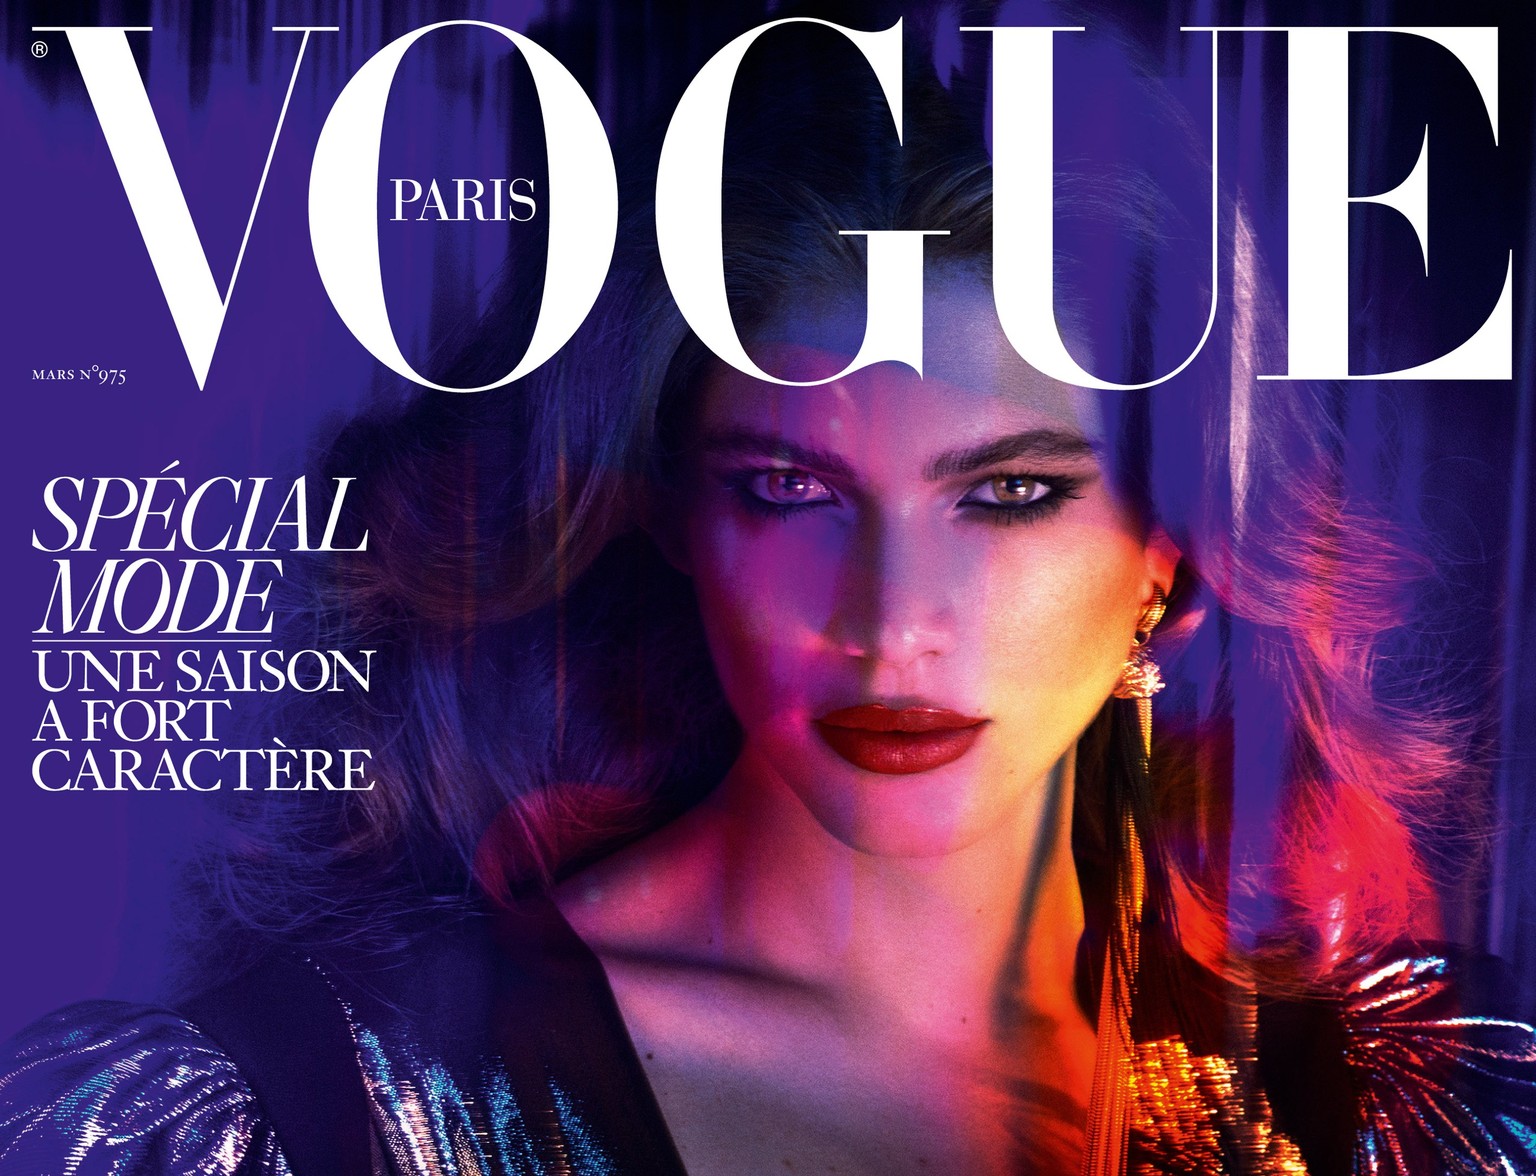 epa05796305 An undated handout photo made available by Conde Nast France on 16 February 2017 shows the cover of the April 2017 issue of Vogue Paris featuring Brazilian model Valentina Sampaio. Photogr ...